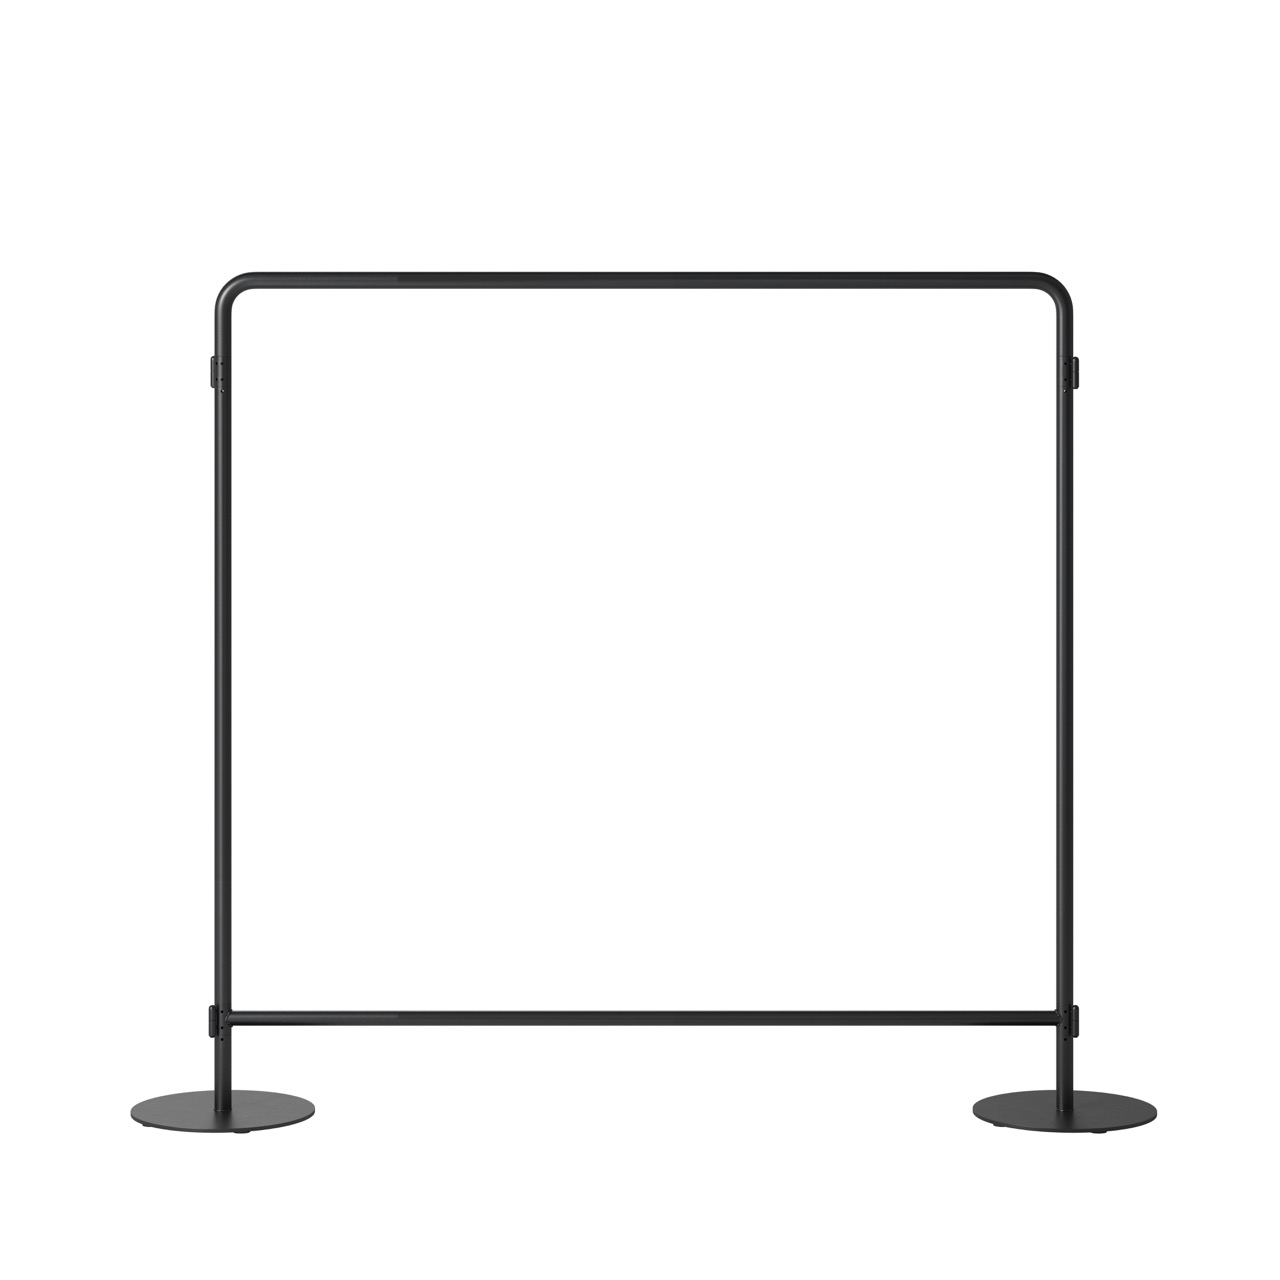 OCEE&FOUR – FourPeople Panels - Stand Alone – 1400x1370 - Frame - Packshot Image 2 Large